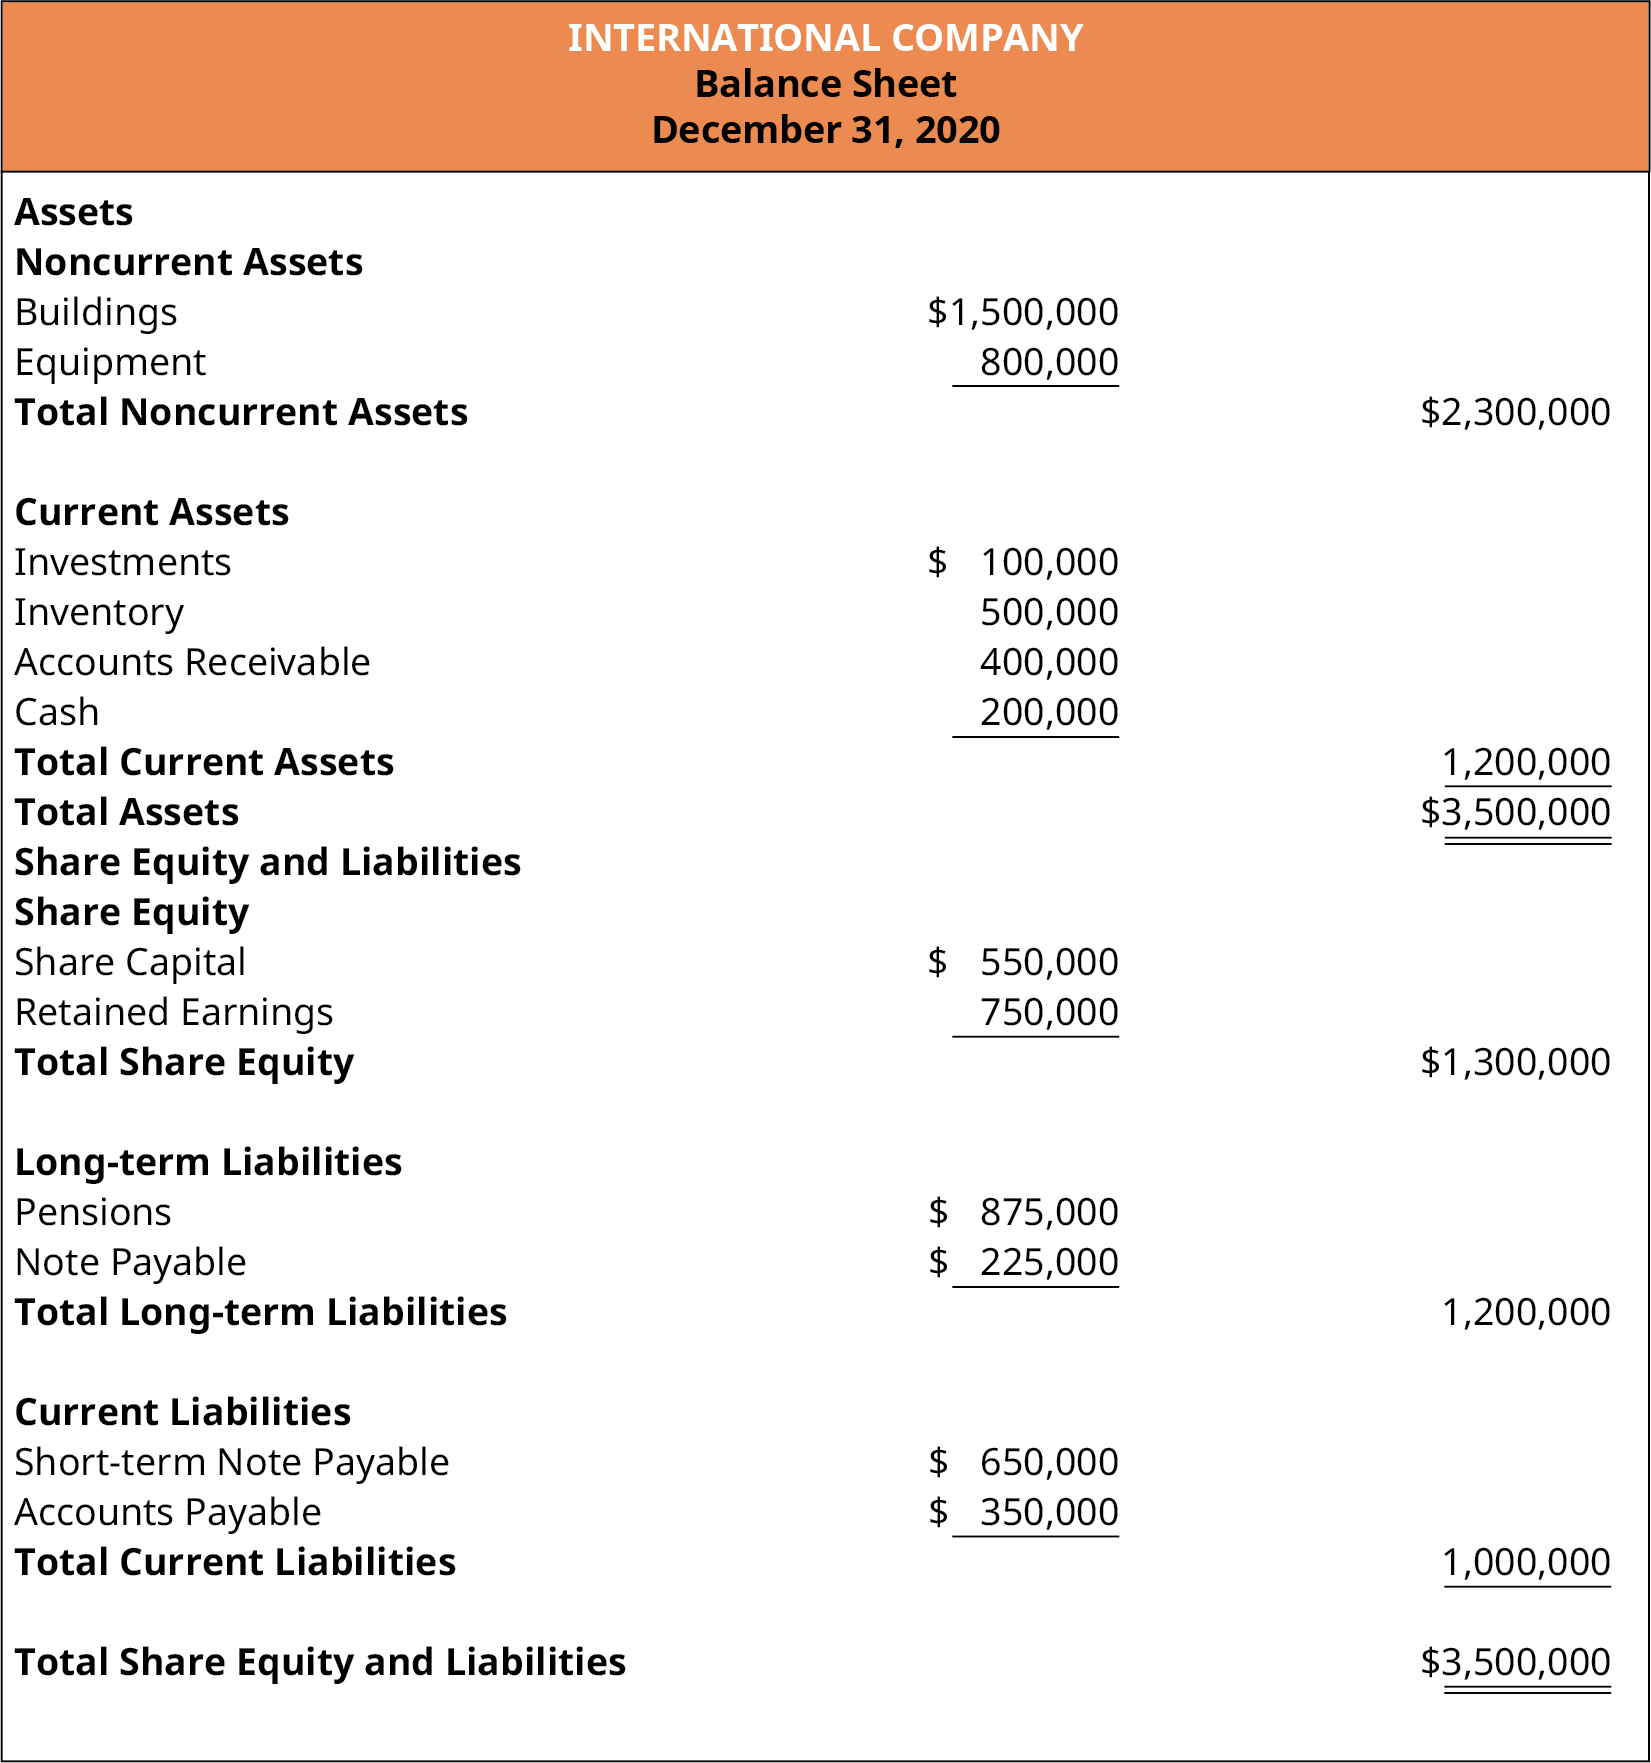 International Company, Balance Sheet, December 31, 2020. Assets, Noncurrent Assets: Buildings $1,500,000; Equipment 800,000; Total Noncurrent Assets $2,300,000. Current Assets: Investments $100,000; Inventories 500,000; Accounts Receivable 400,000; Cash 200,000; Total Current Assets 1,200,000. Total Assets $3,500,000. Share Equity and Liabilities, Share Equity: Share Capital, $550,000; Retained Earnings 750,000; Total Share Equity $1,300,000. Long-term Liabilities: Pensions $875,000; Note Payable 325,000; Total Long-Term Liabilities 1,200,000. Current Liabilities: Short-term Note Payable $650,000; Accounts Payable 350,000; Total Current Liabilities 1,000,000. Total Share Equity and Liabilities $3,500,000.